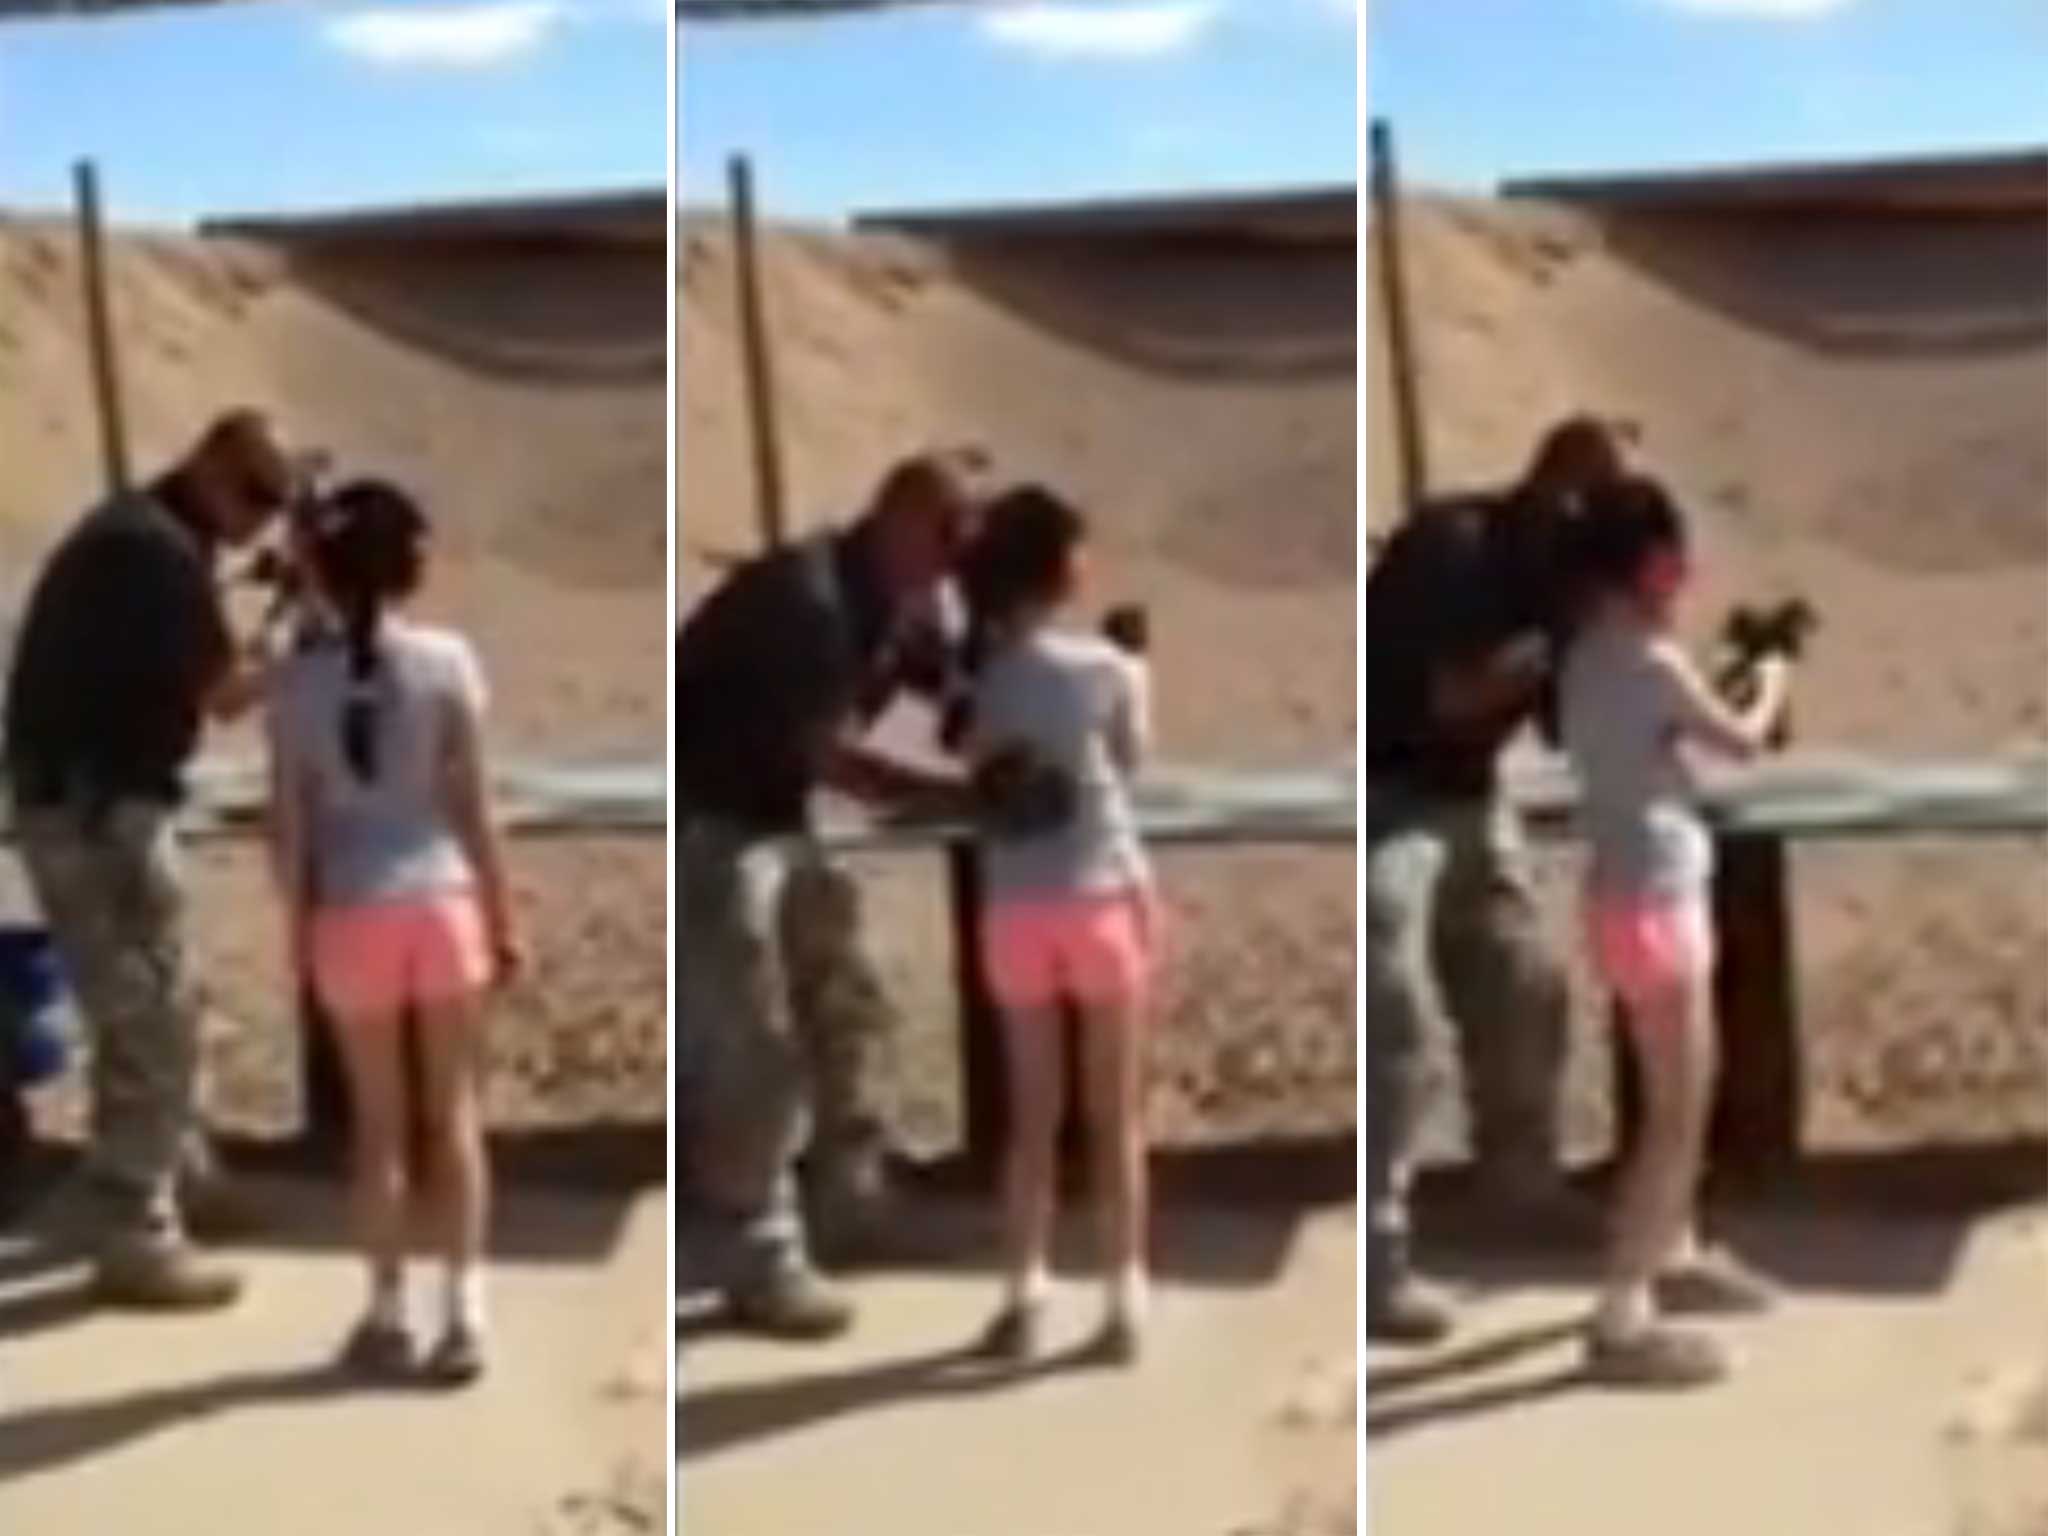 Video stills documenting the moments before a nine-year-old lost control of the uzi